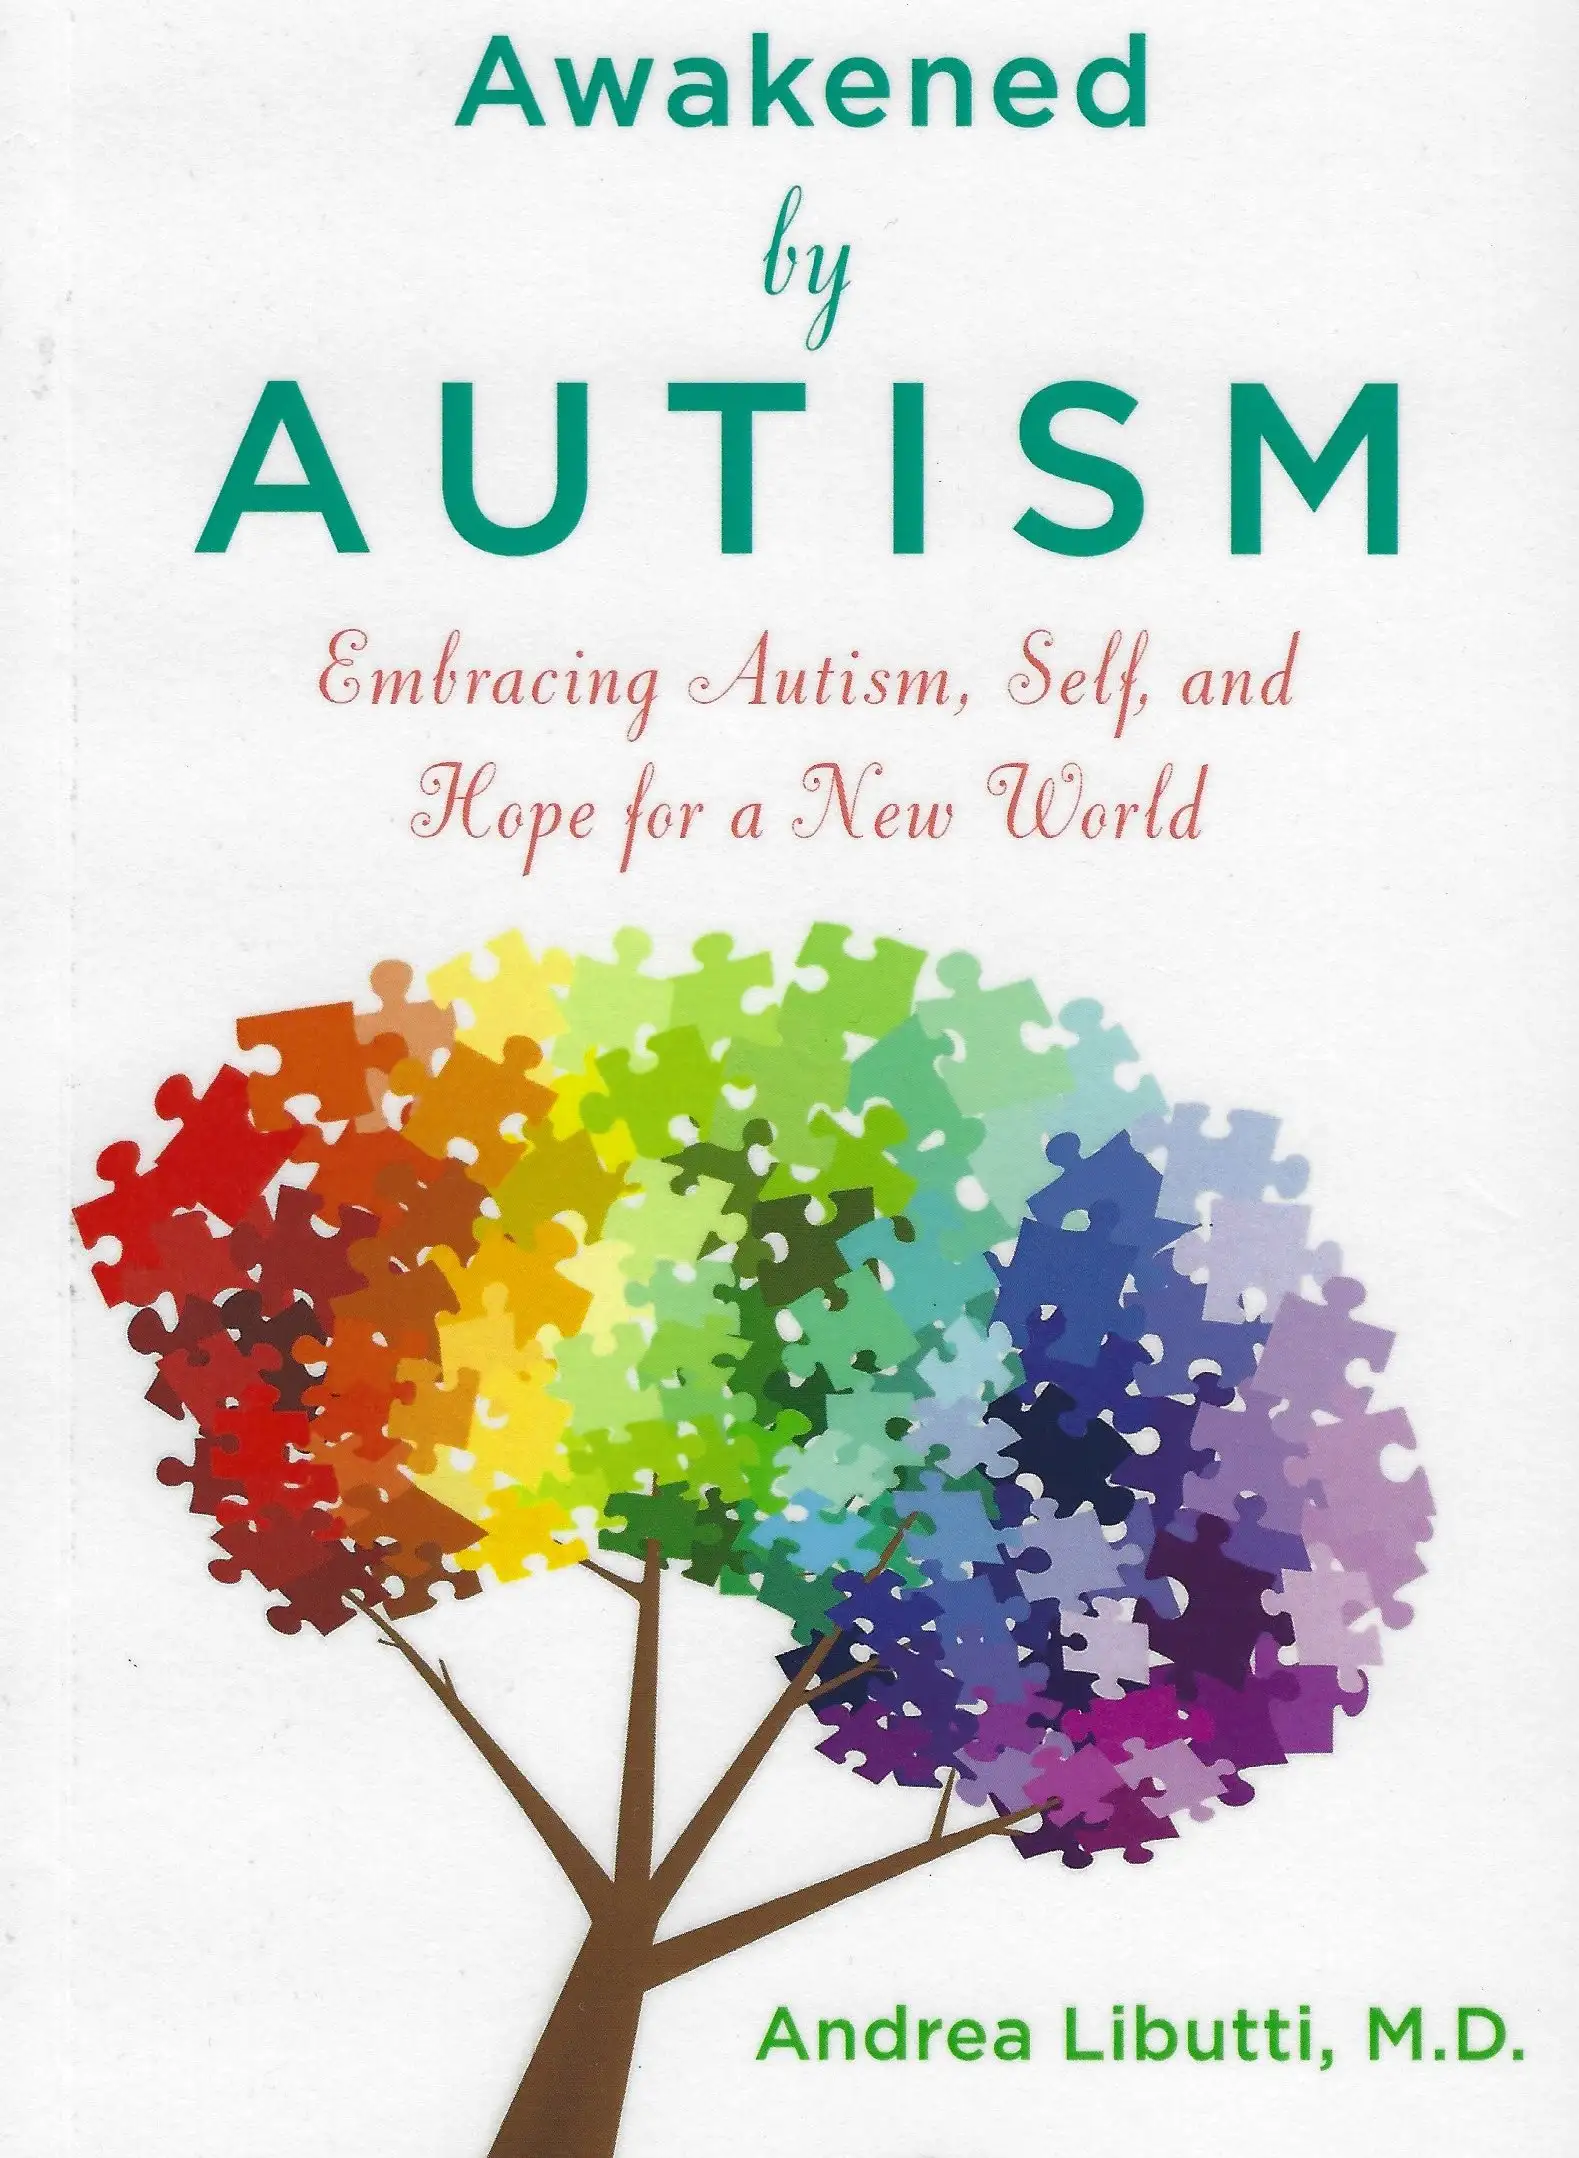 Awakened by autism enhancing autism, self, and hope for a new world.